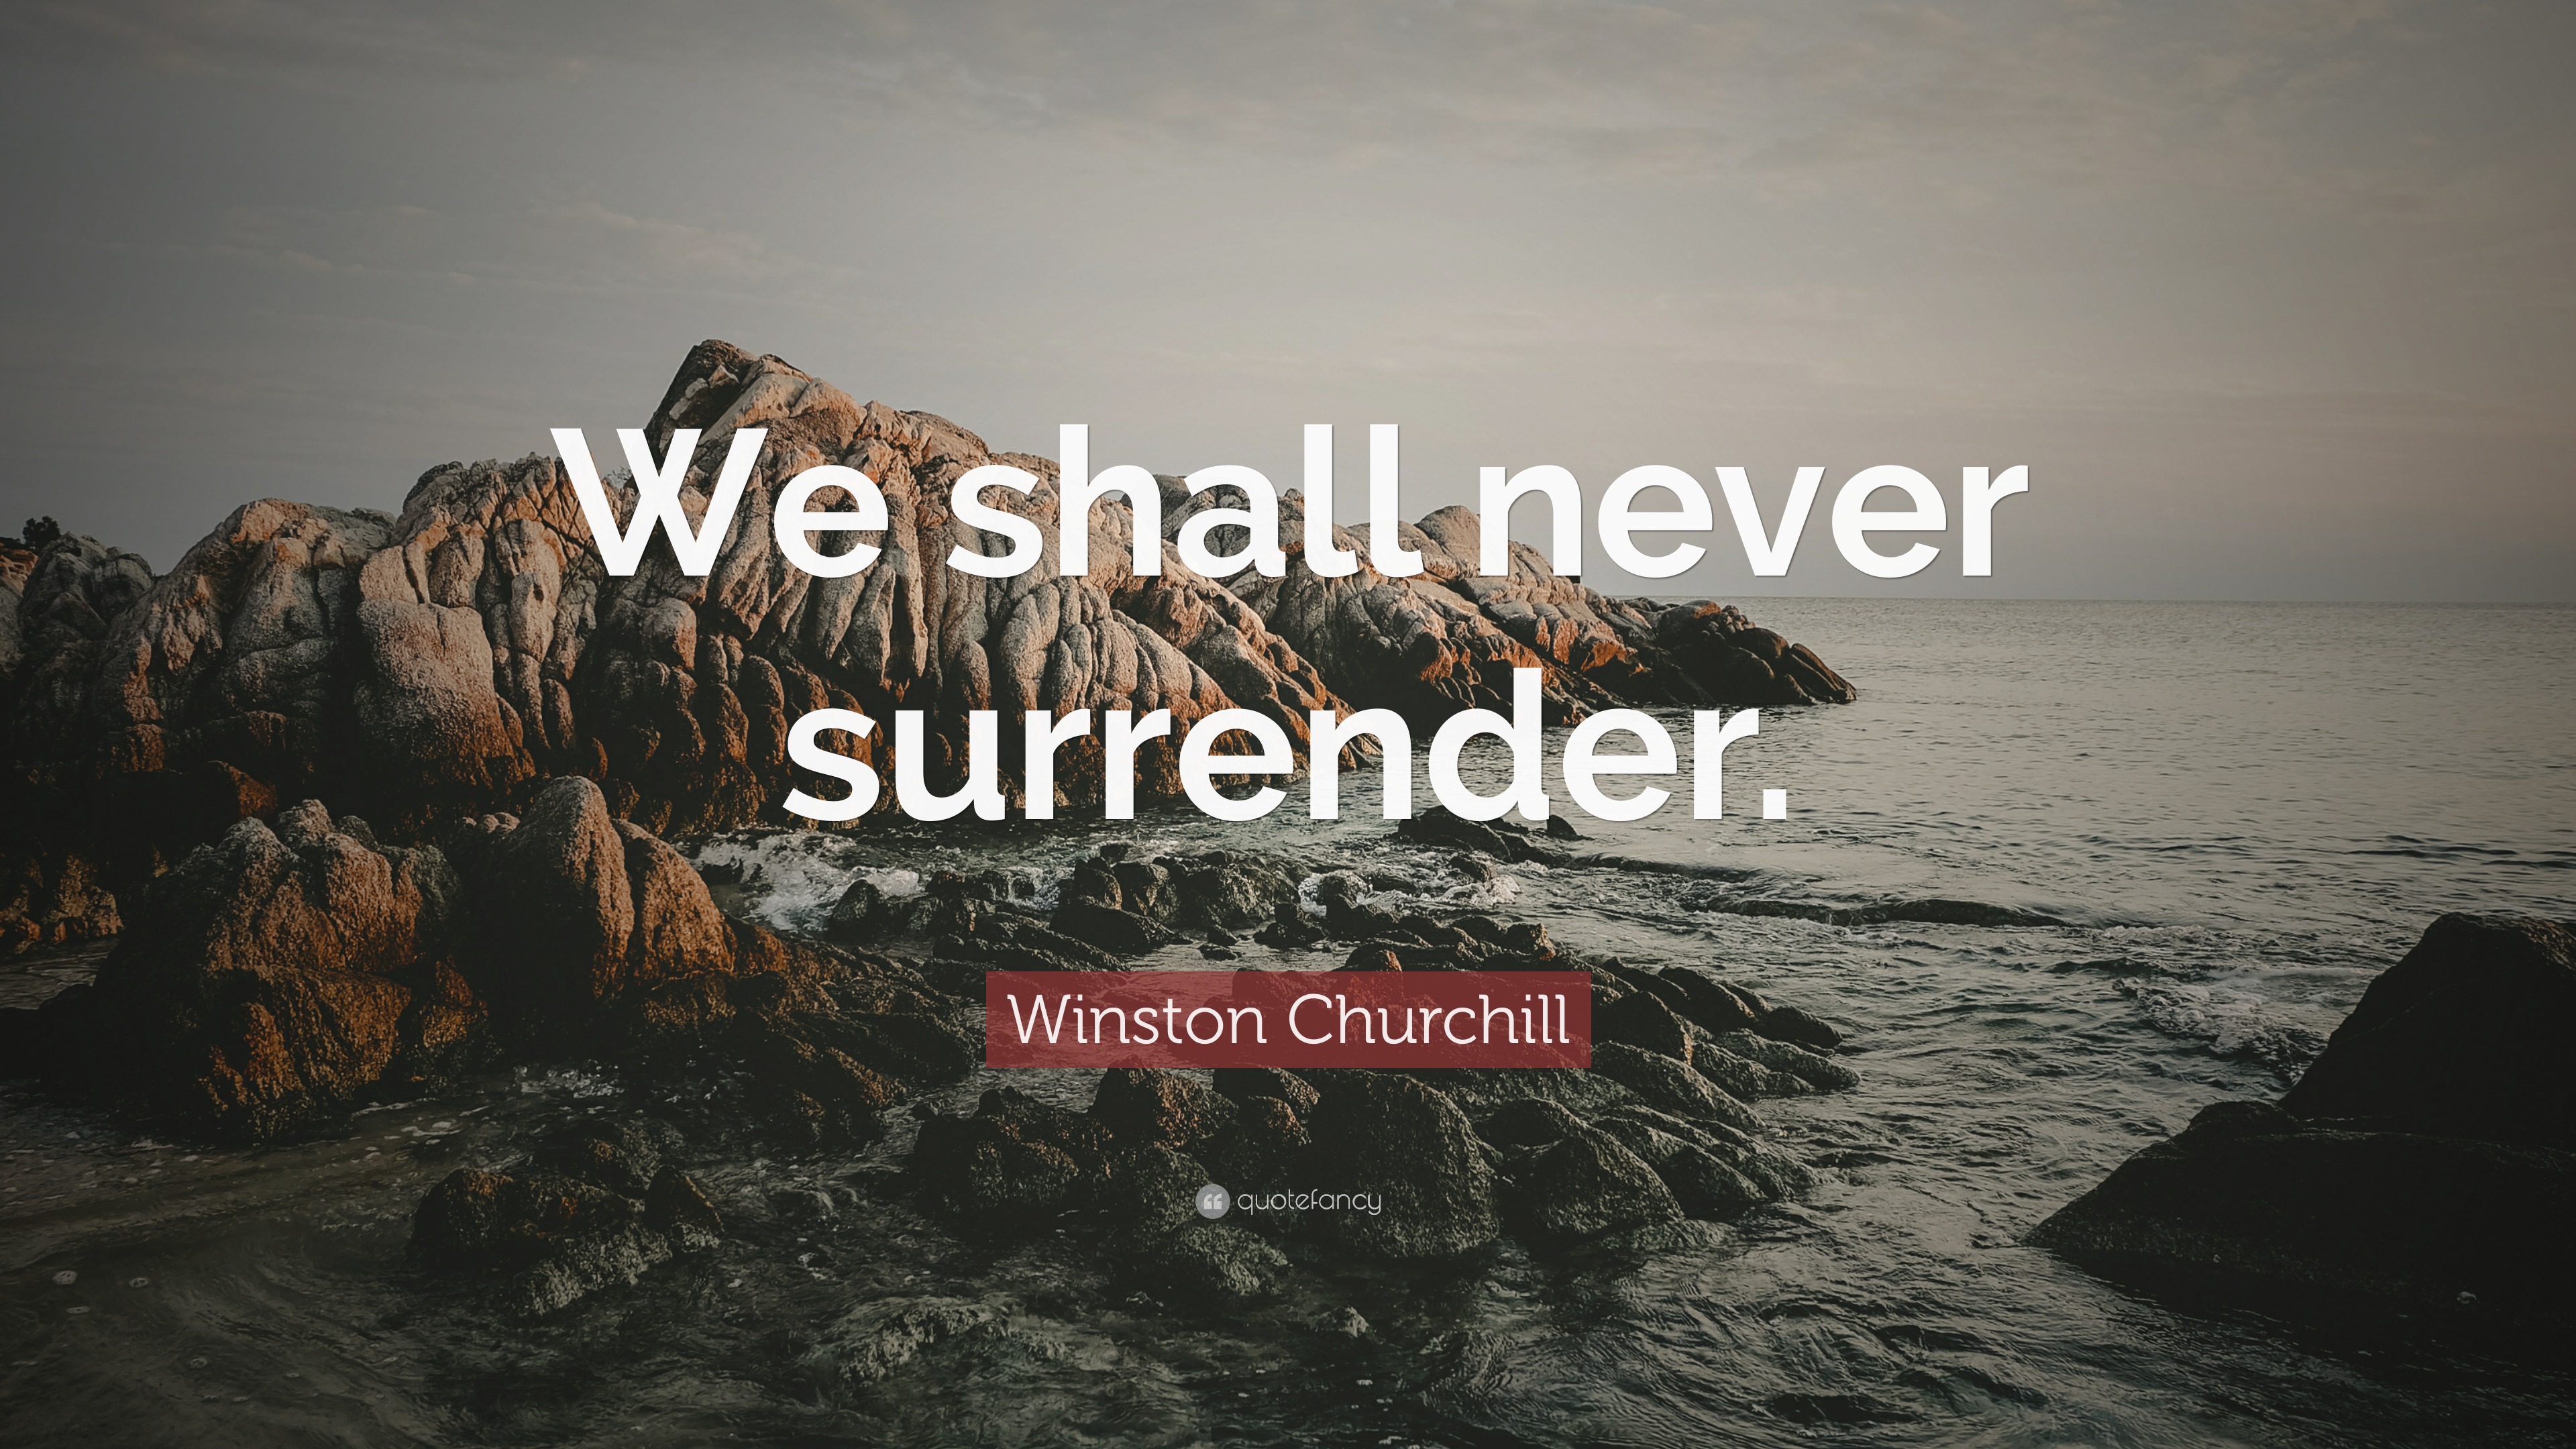 Winston Churchill Quote: “We shall never surrender.”